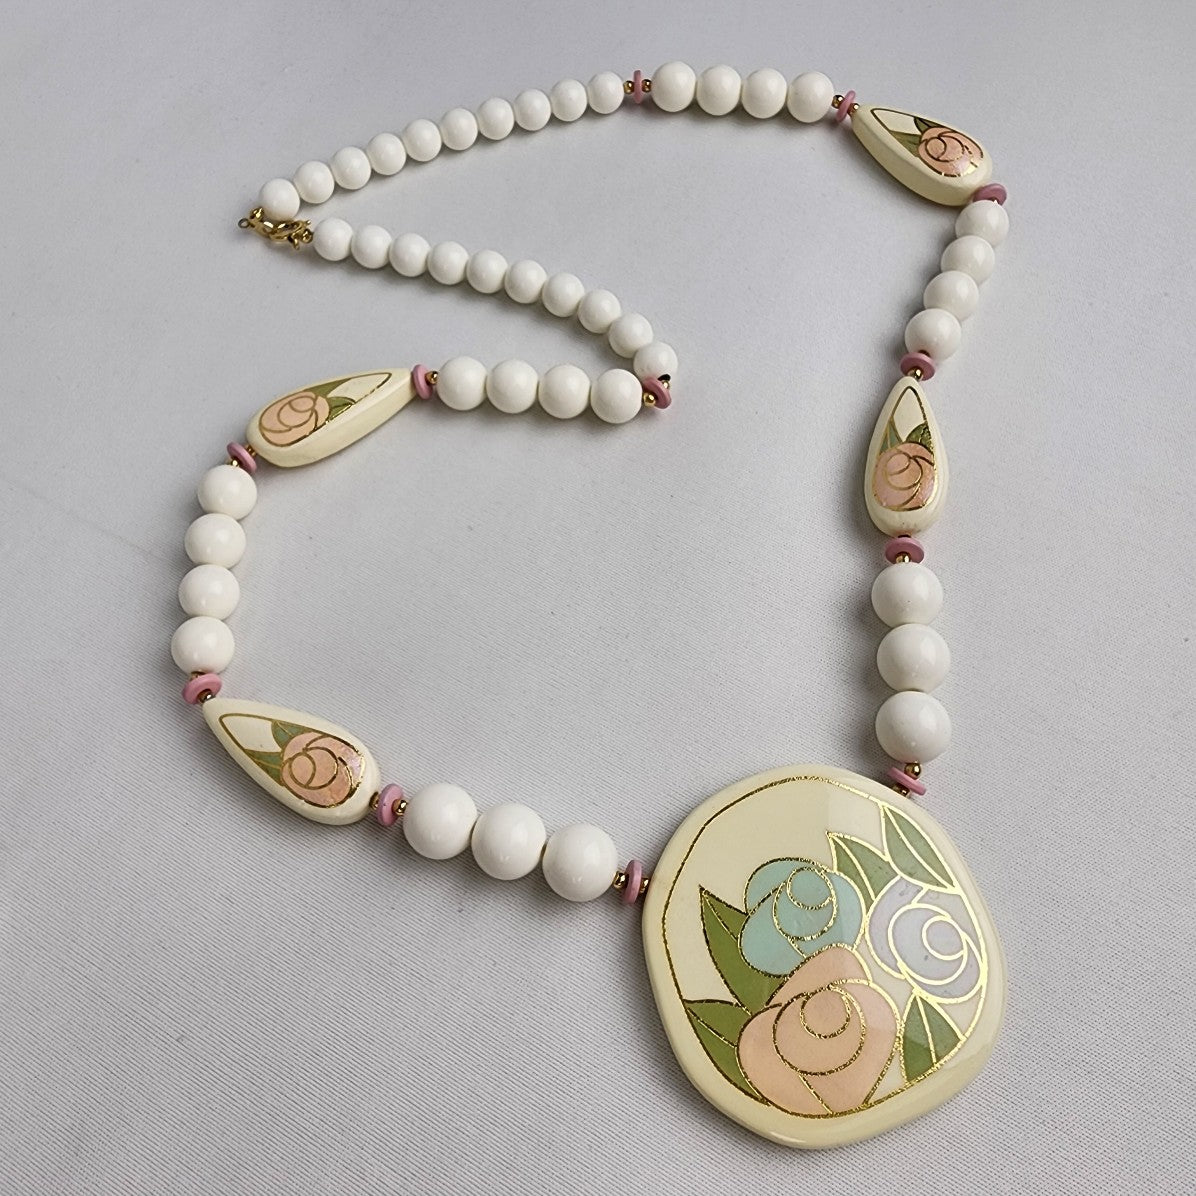 Vintage Japan Ceramic White Beaded Necklace Hand Painted Floral Necklace